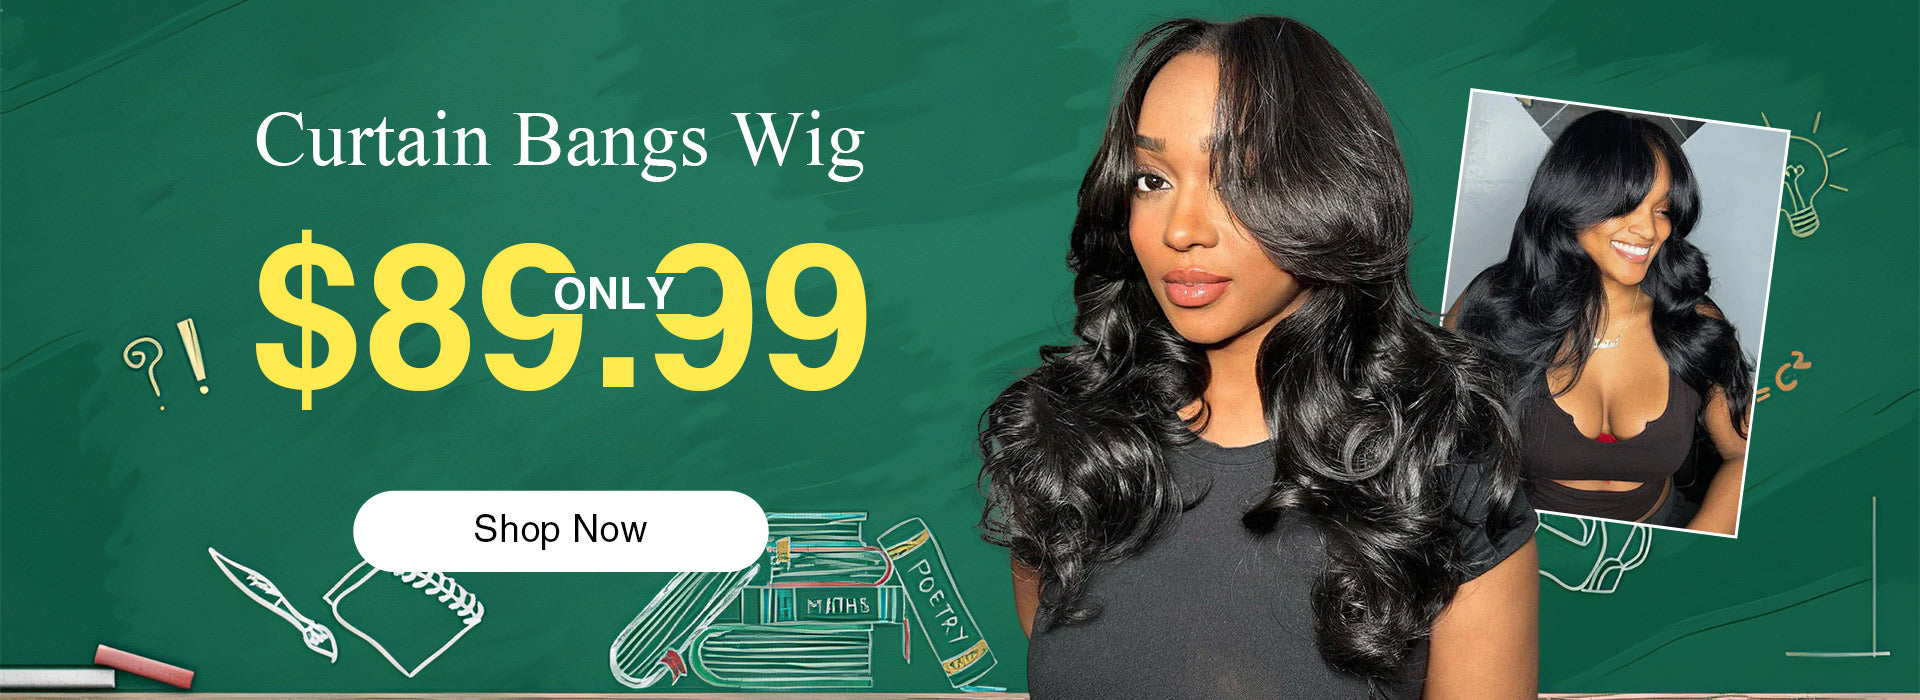 Curtain Bangs Wig Only $89.99